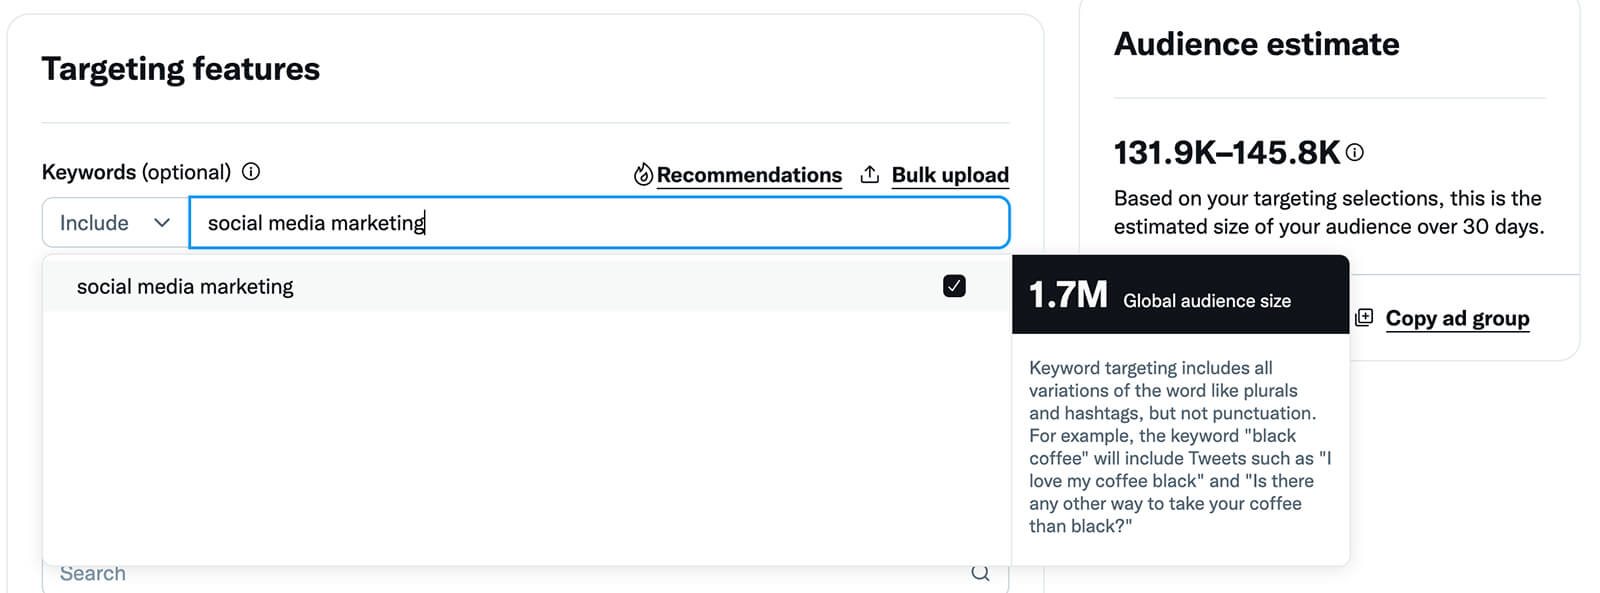 how-to-scale-twitter-ads-expand-your-target-audience-layer-more-additive-targeting-broaden-keyword-estimated-audience-size-targeting-features-recommendations-example-10